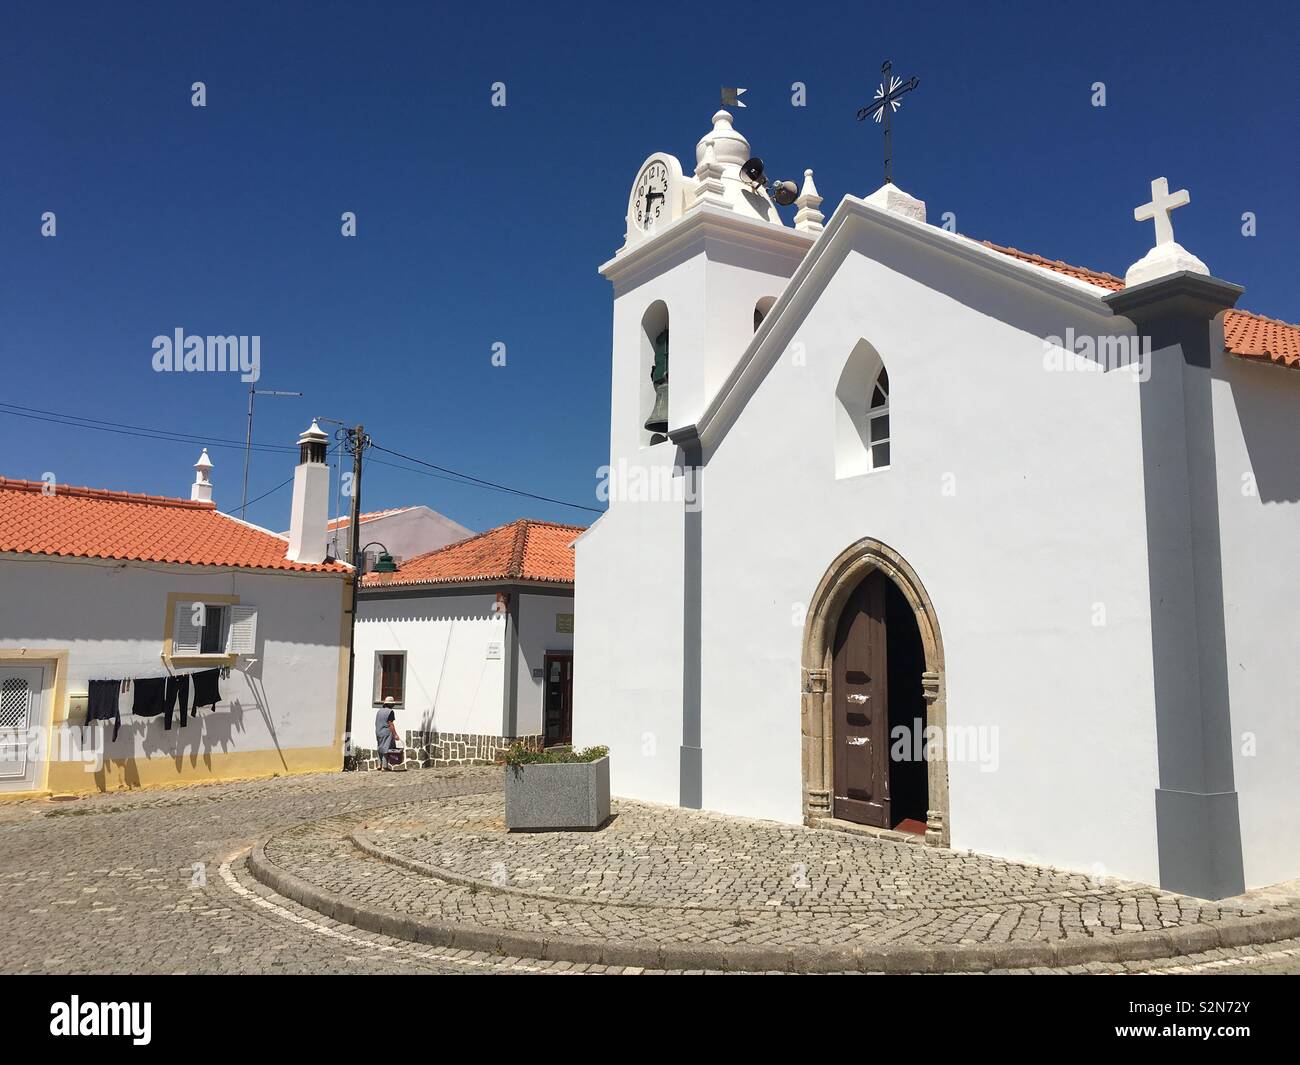 Church and townsquare at town Alte, Algarve,Portugal. Stock Photo